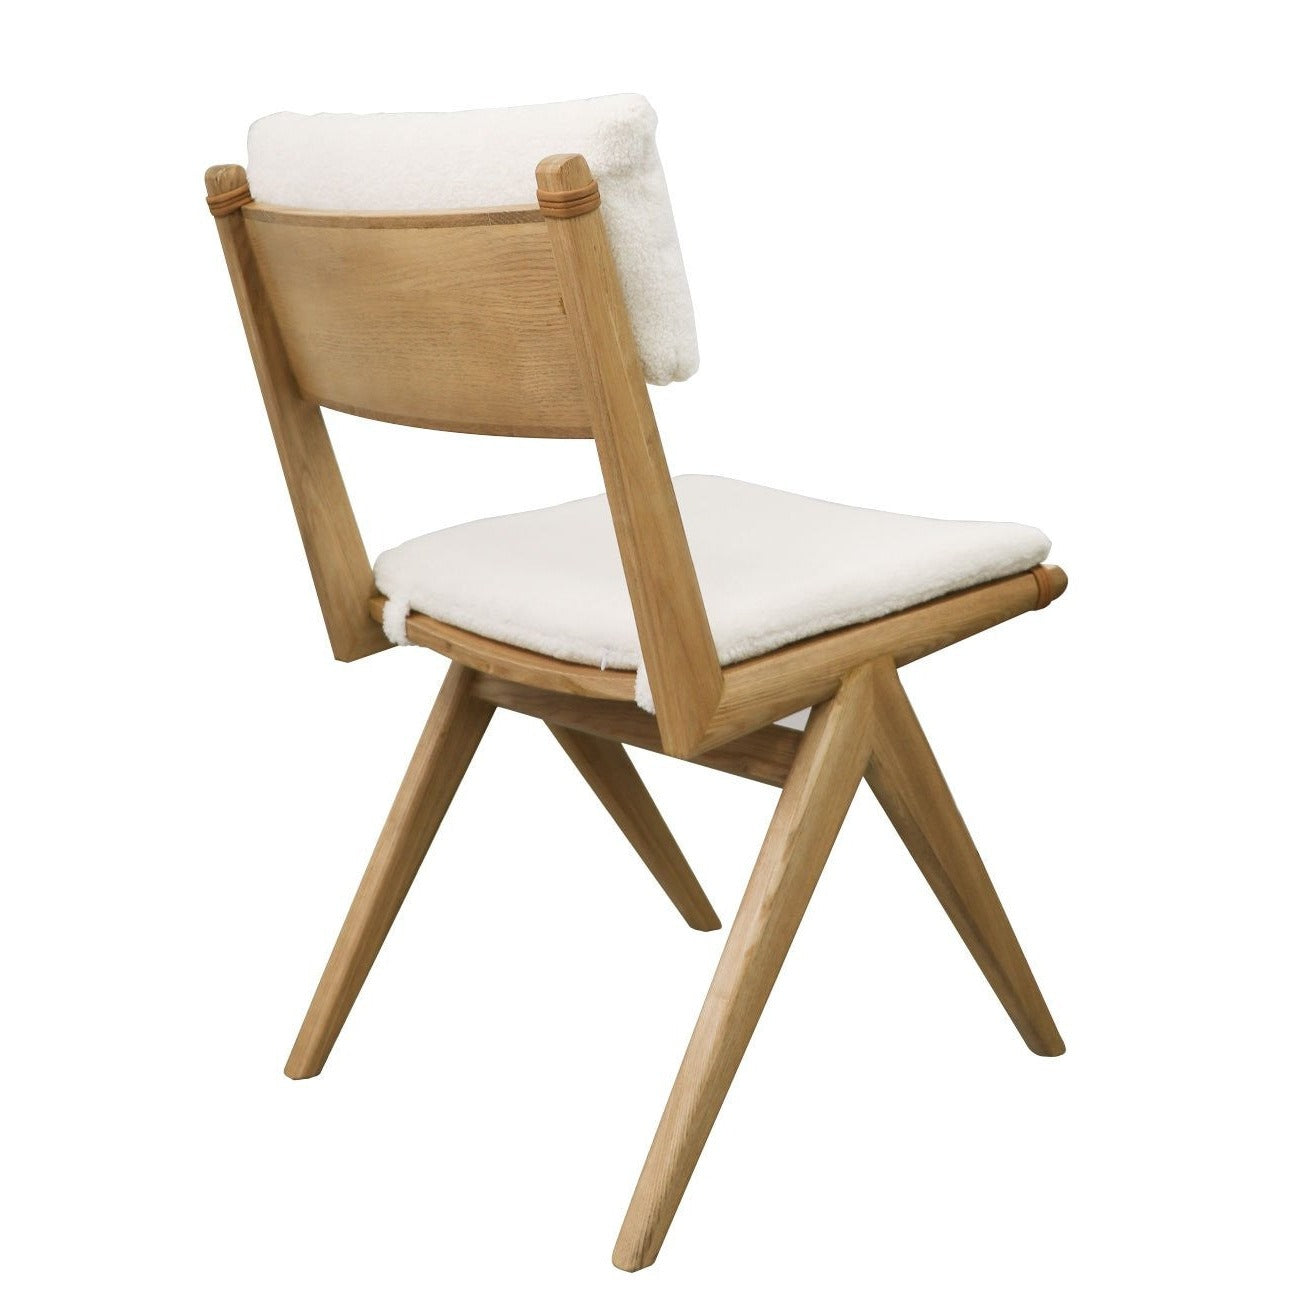 Cleve Dining Chair - Natural